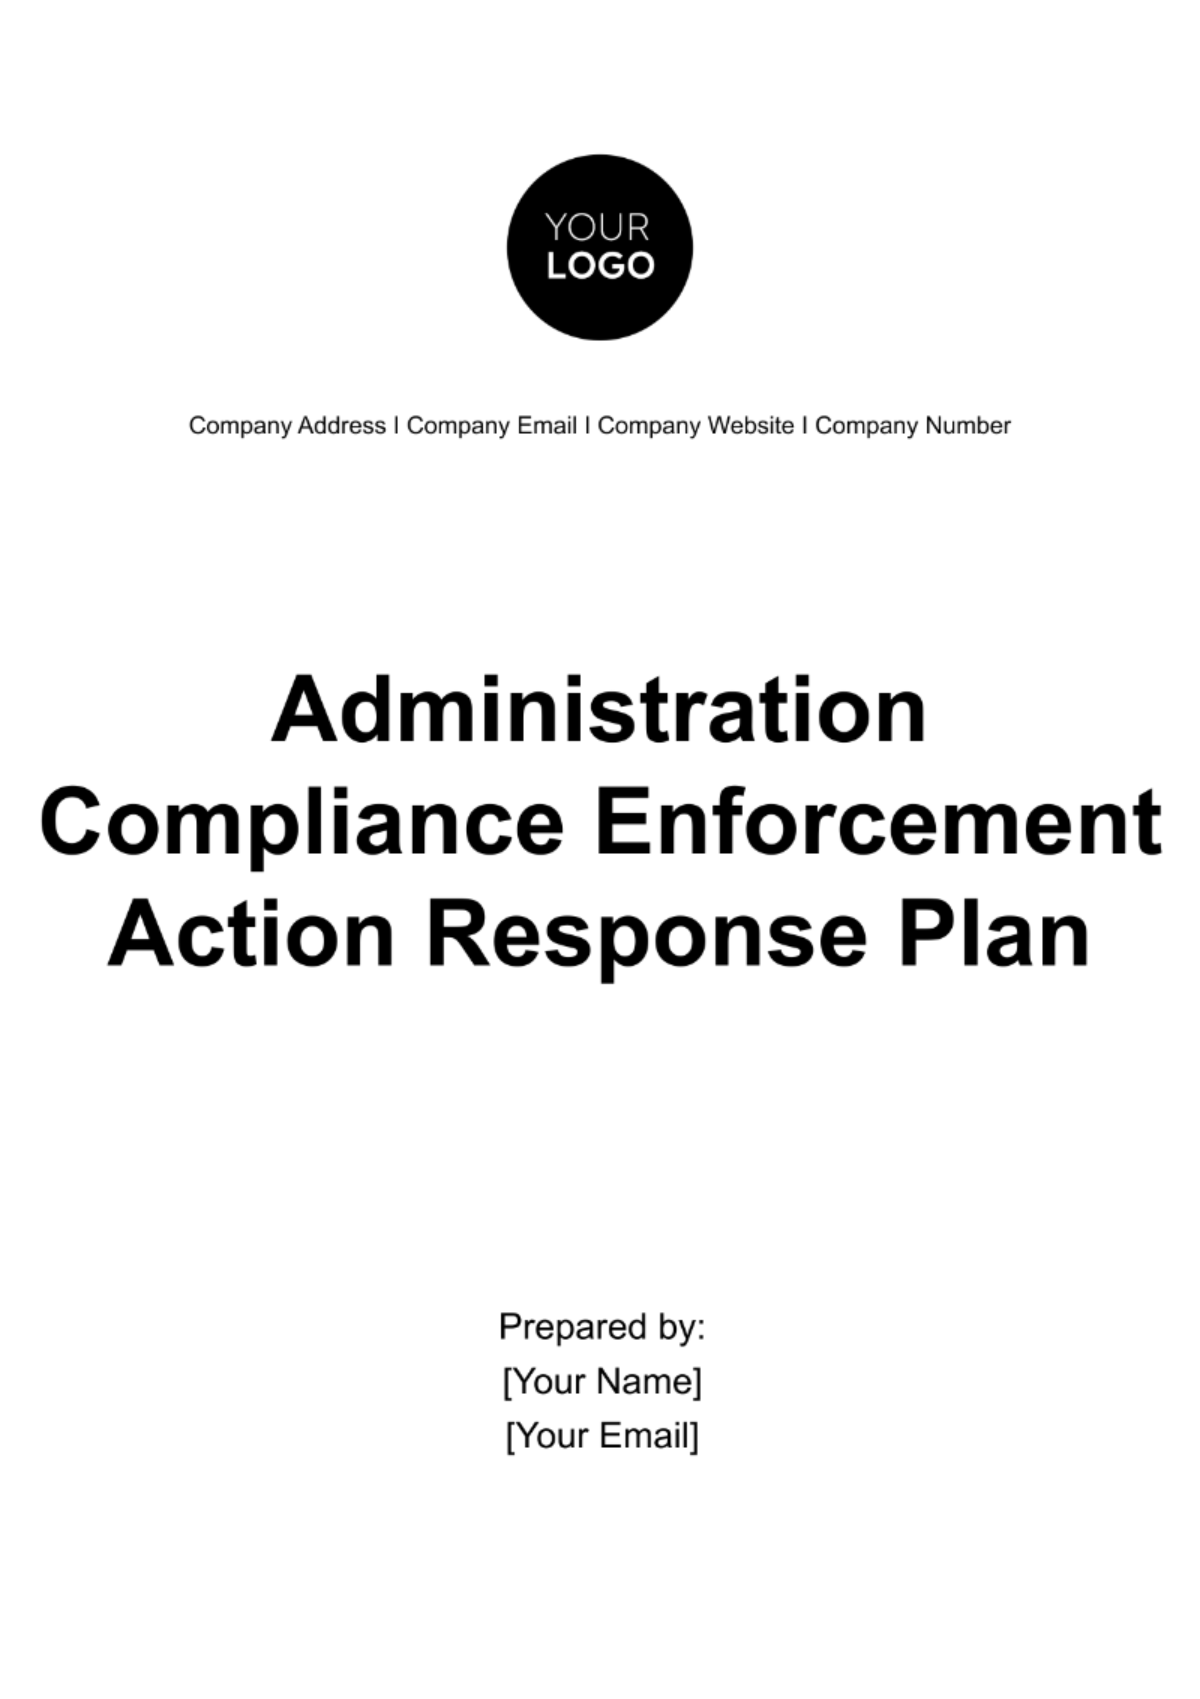 Free Administration Compliance Enforcement Action Response Plan Template